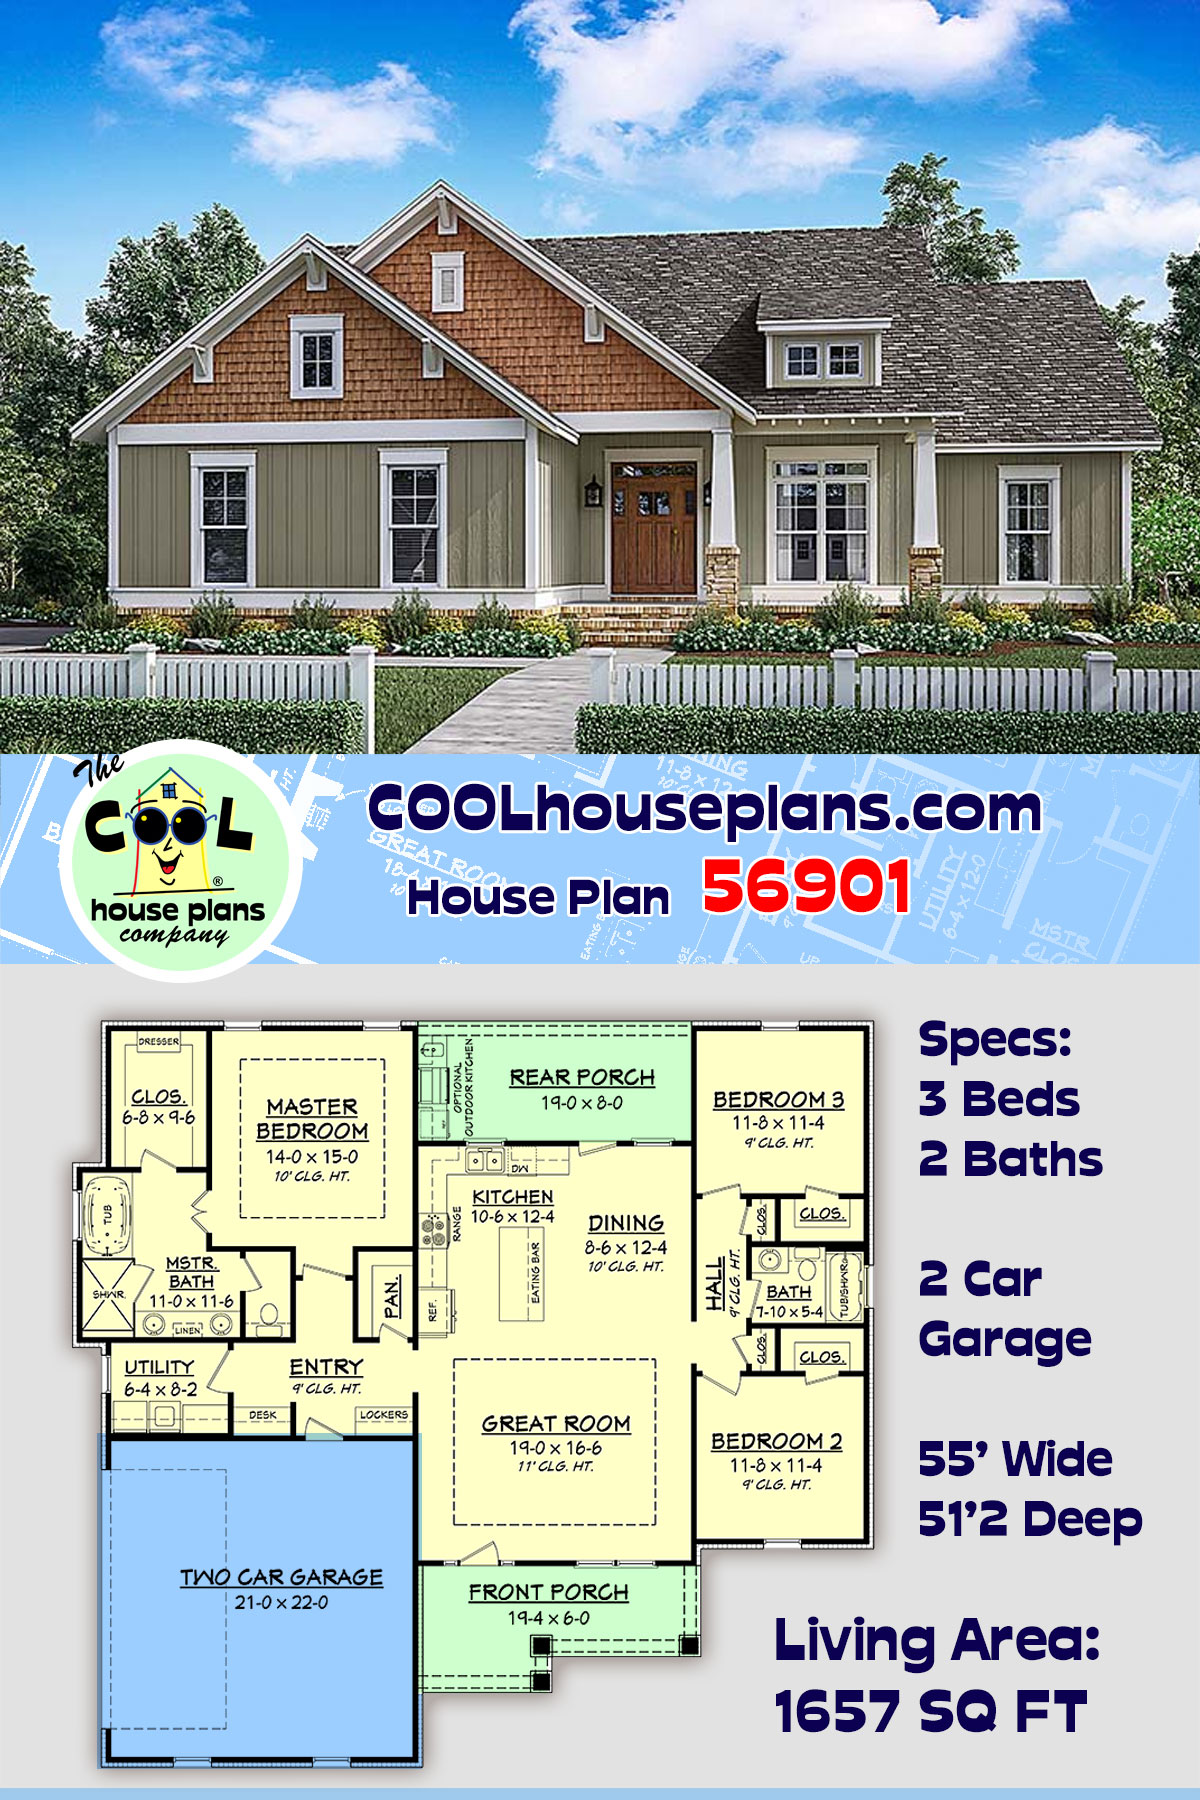 Cottage, Country, Craftsman, Traditional House Plan 56901 with 3 Beds, 2 Baths, 2 Car Garage